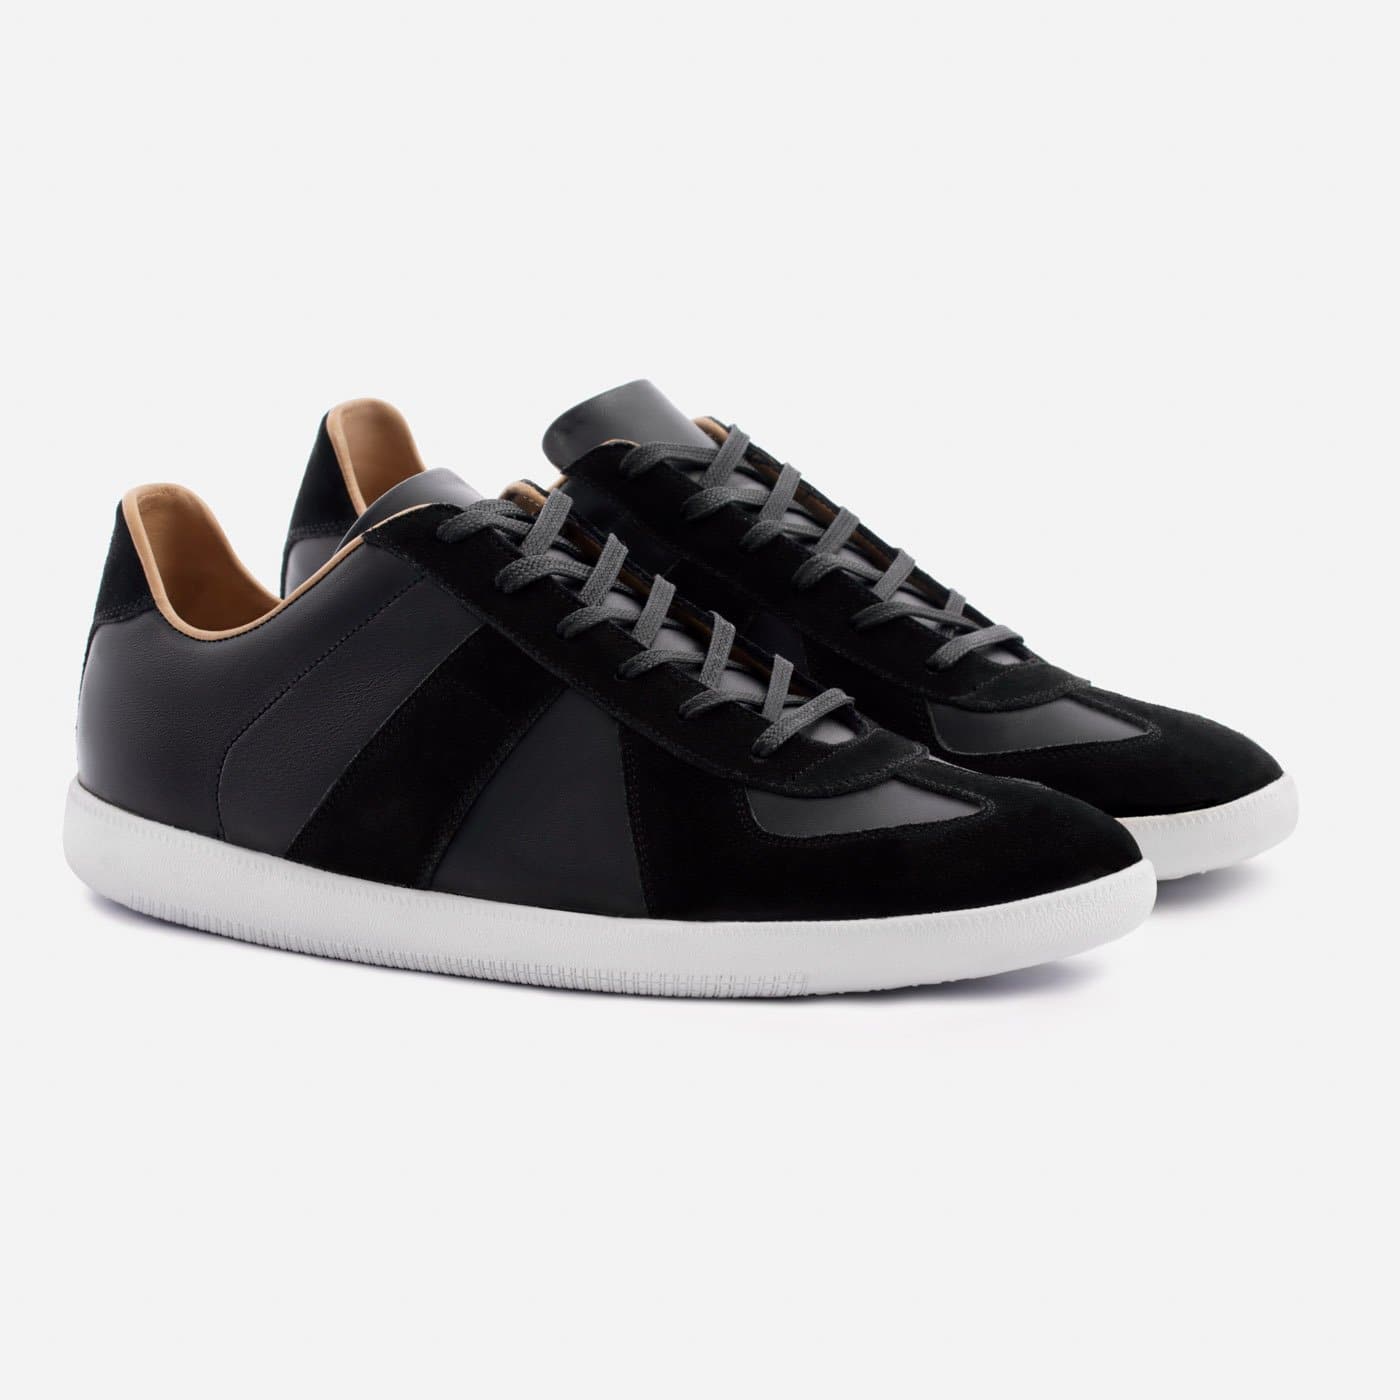 Morgen Trainers - Leather/Suede - Men's